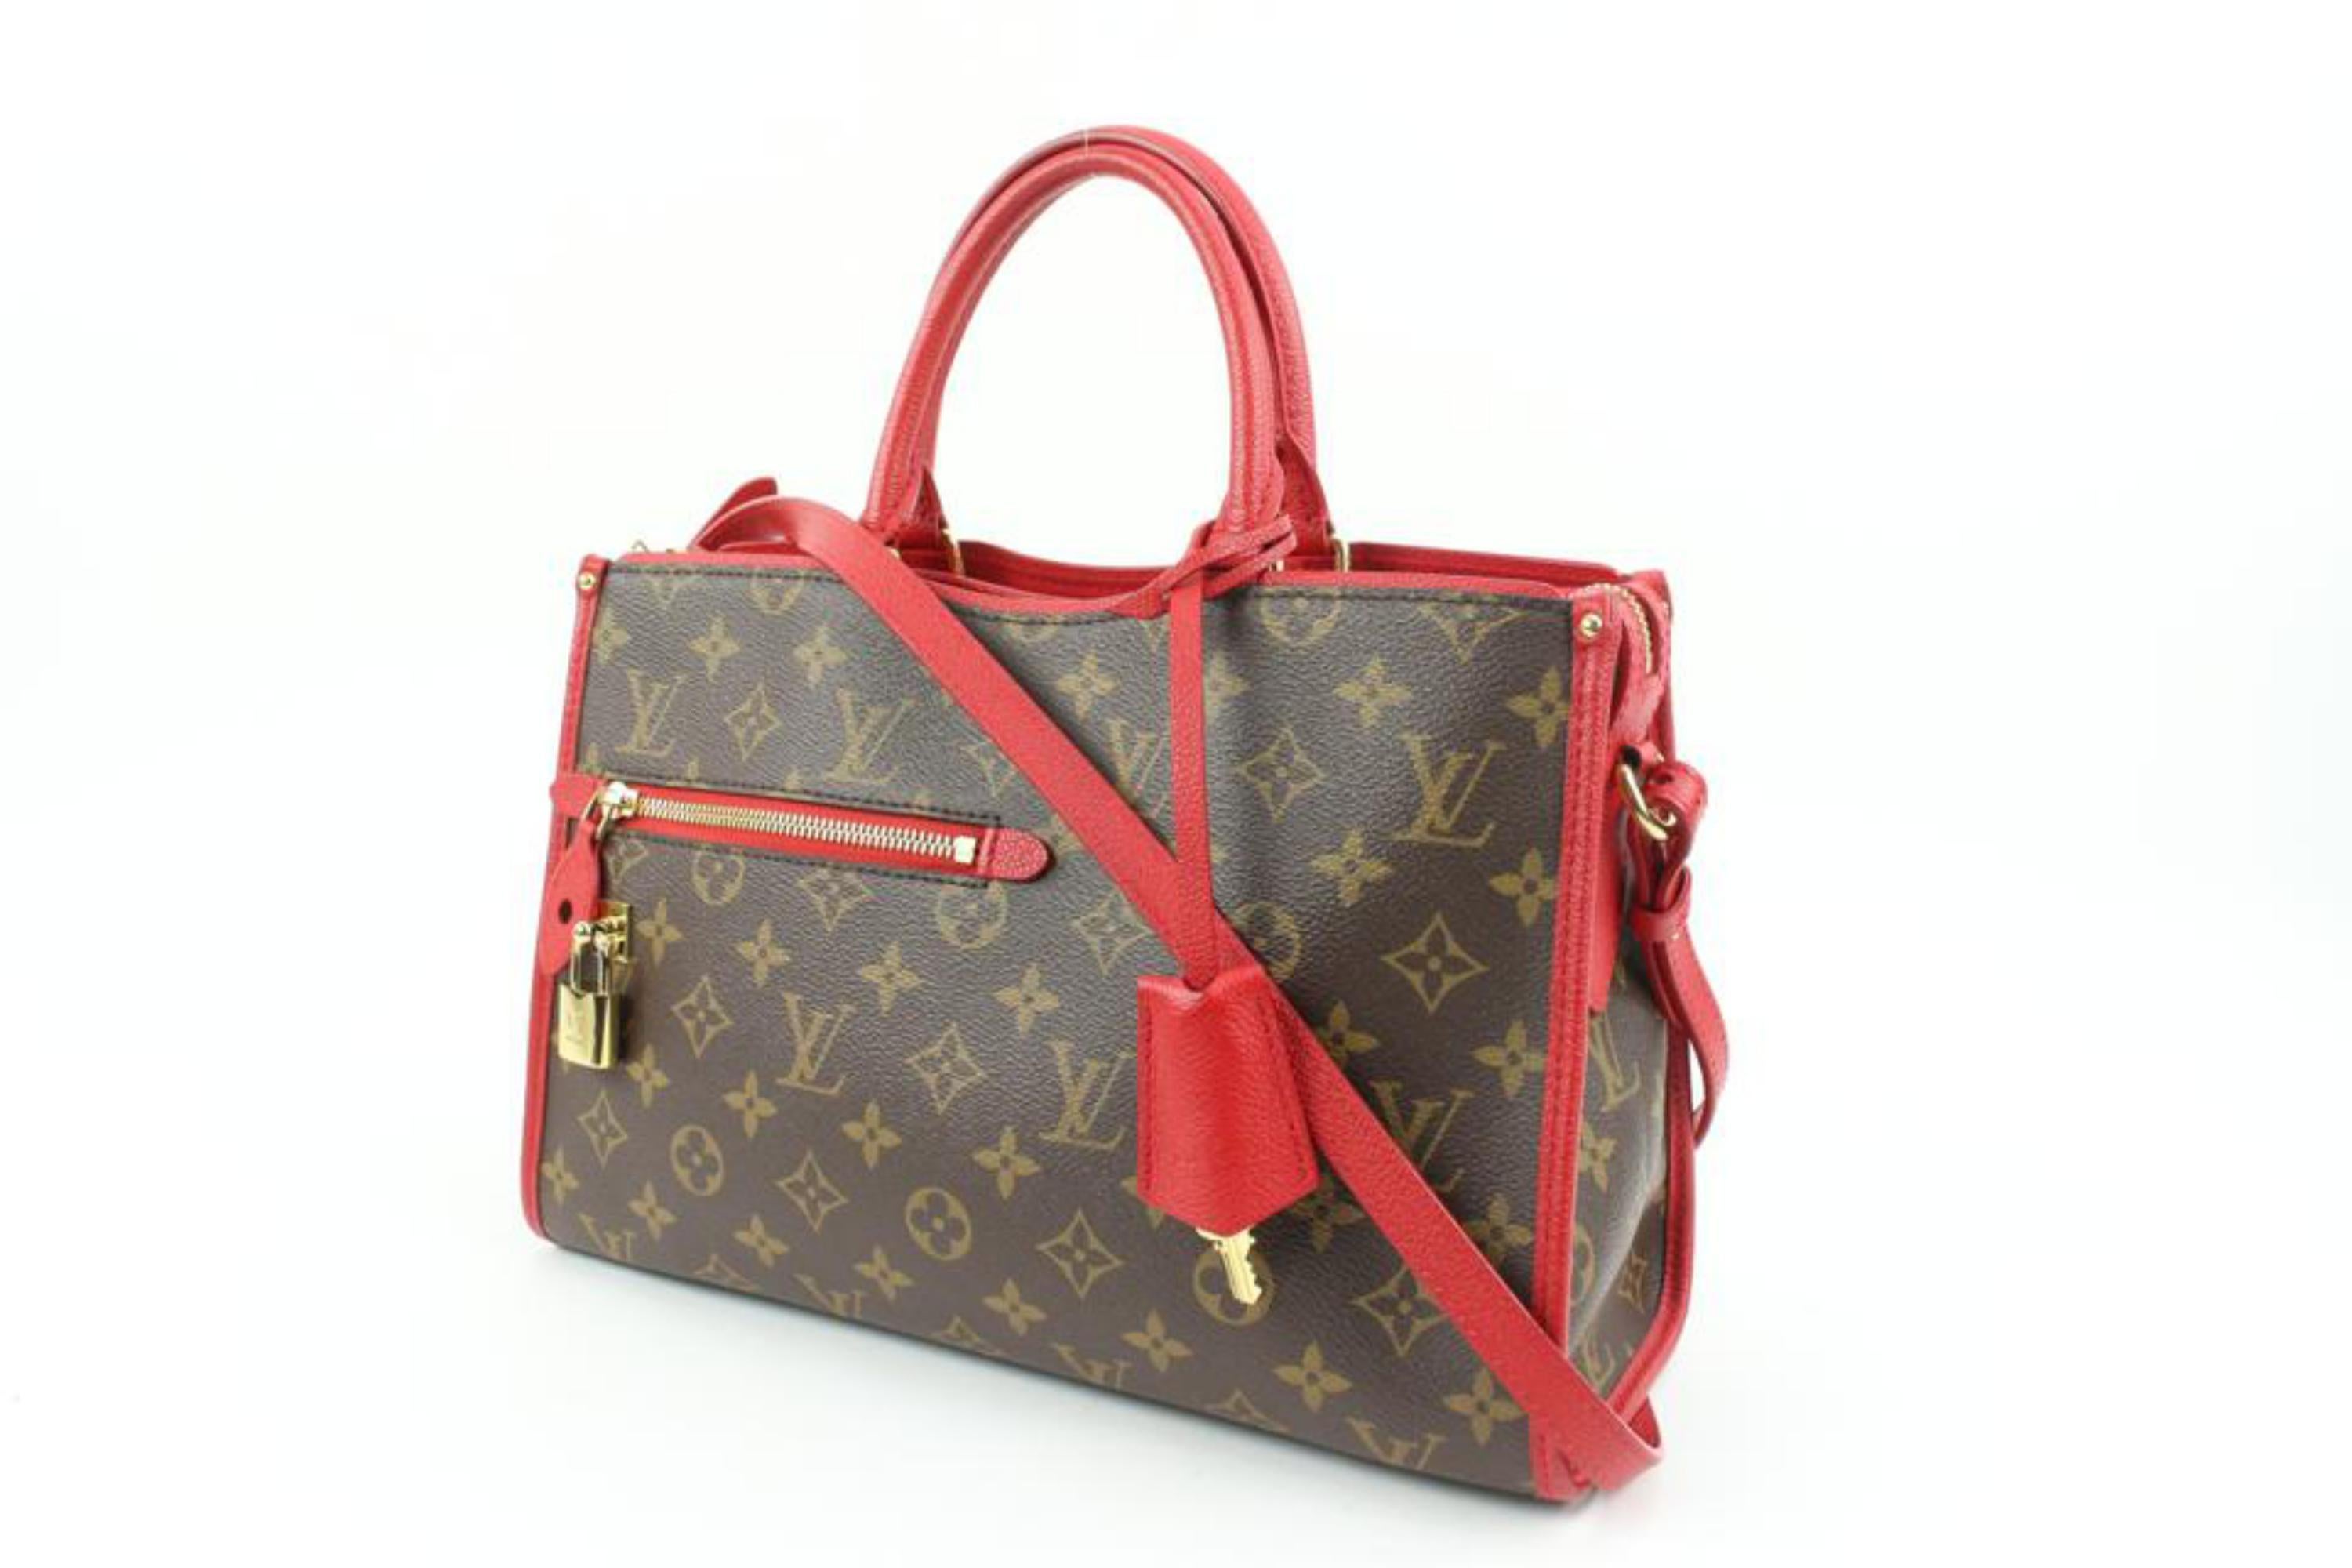 Louis Vuitton Red Monogram Popincourt PM NM 2way Tote with Strap 119lv56
Date Code/Serial Number: DU2017
Made In: France
Measurements: Length:  12.2